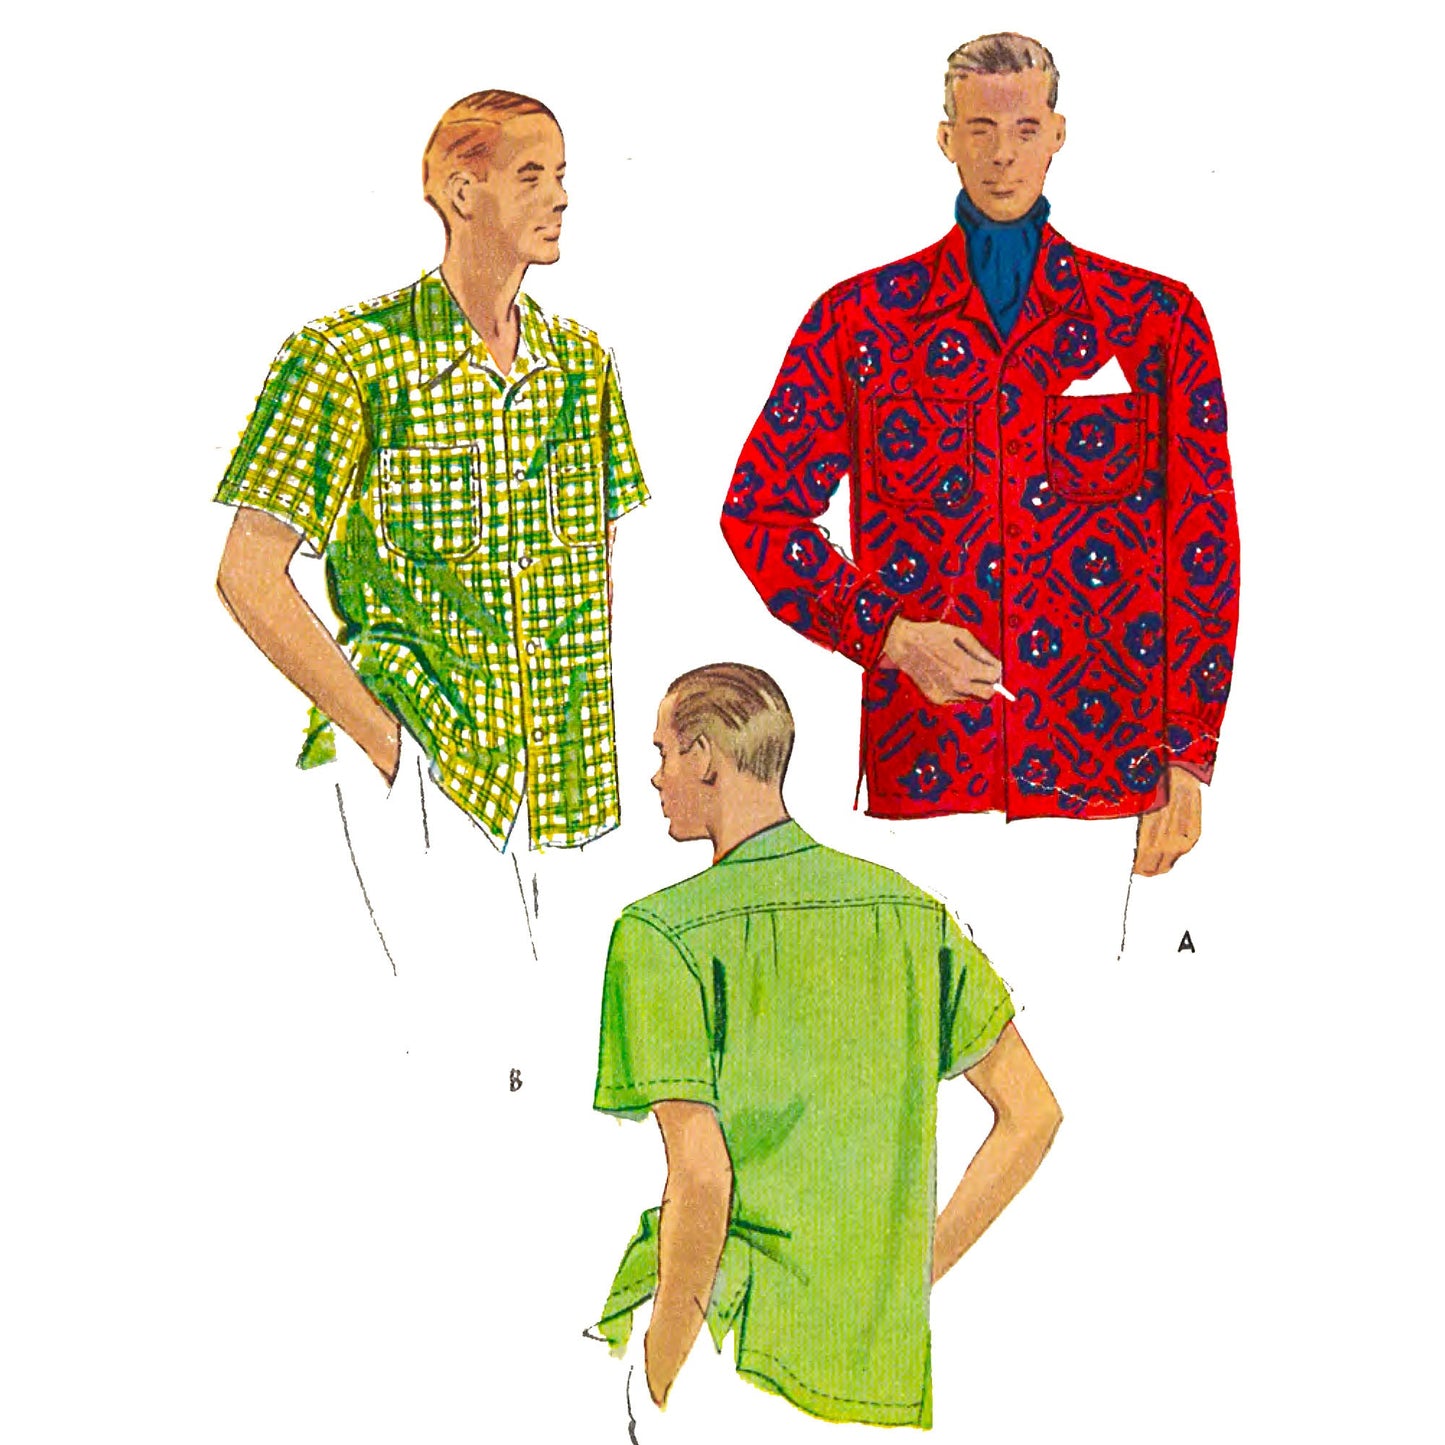 3 men wearing shirts made from McCall's 7906 sewing pattern, front and back views.